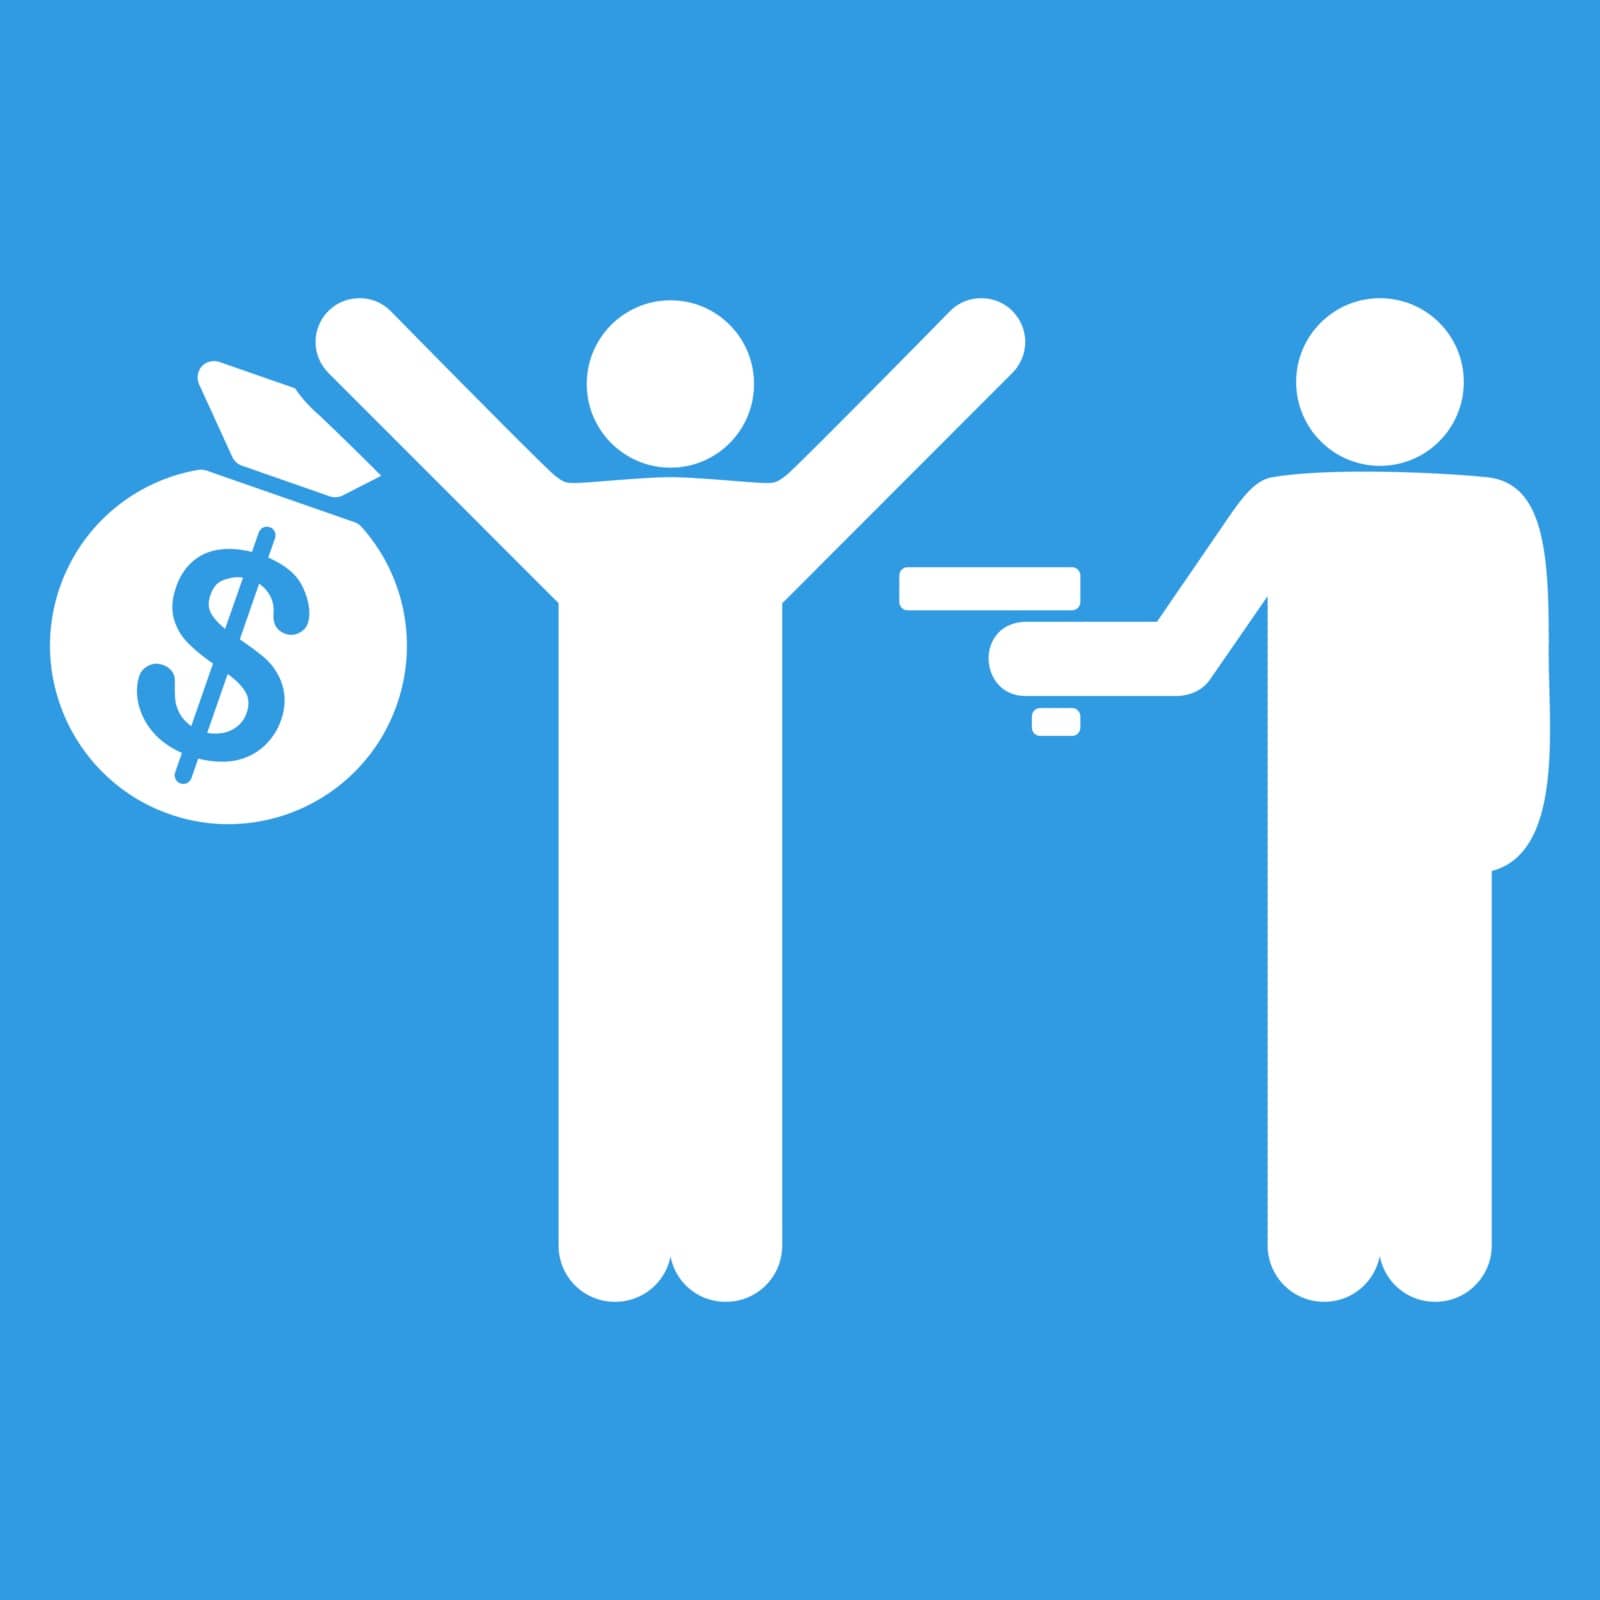 Robbery icon. This flat vector symbol uses white color, rounded angles, and isolated on a blue background.